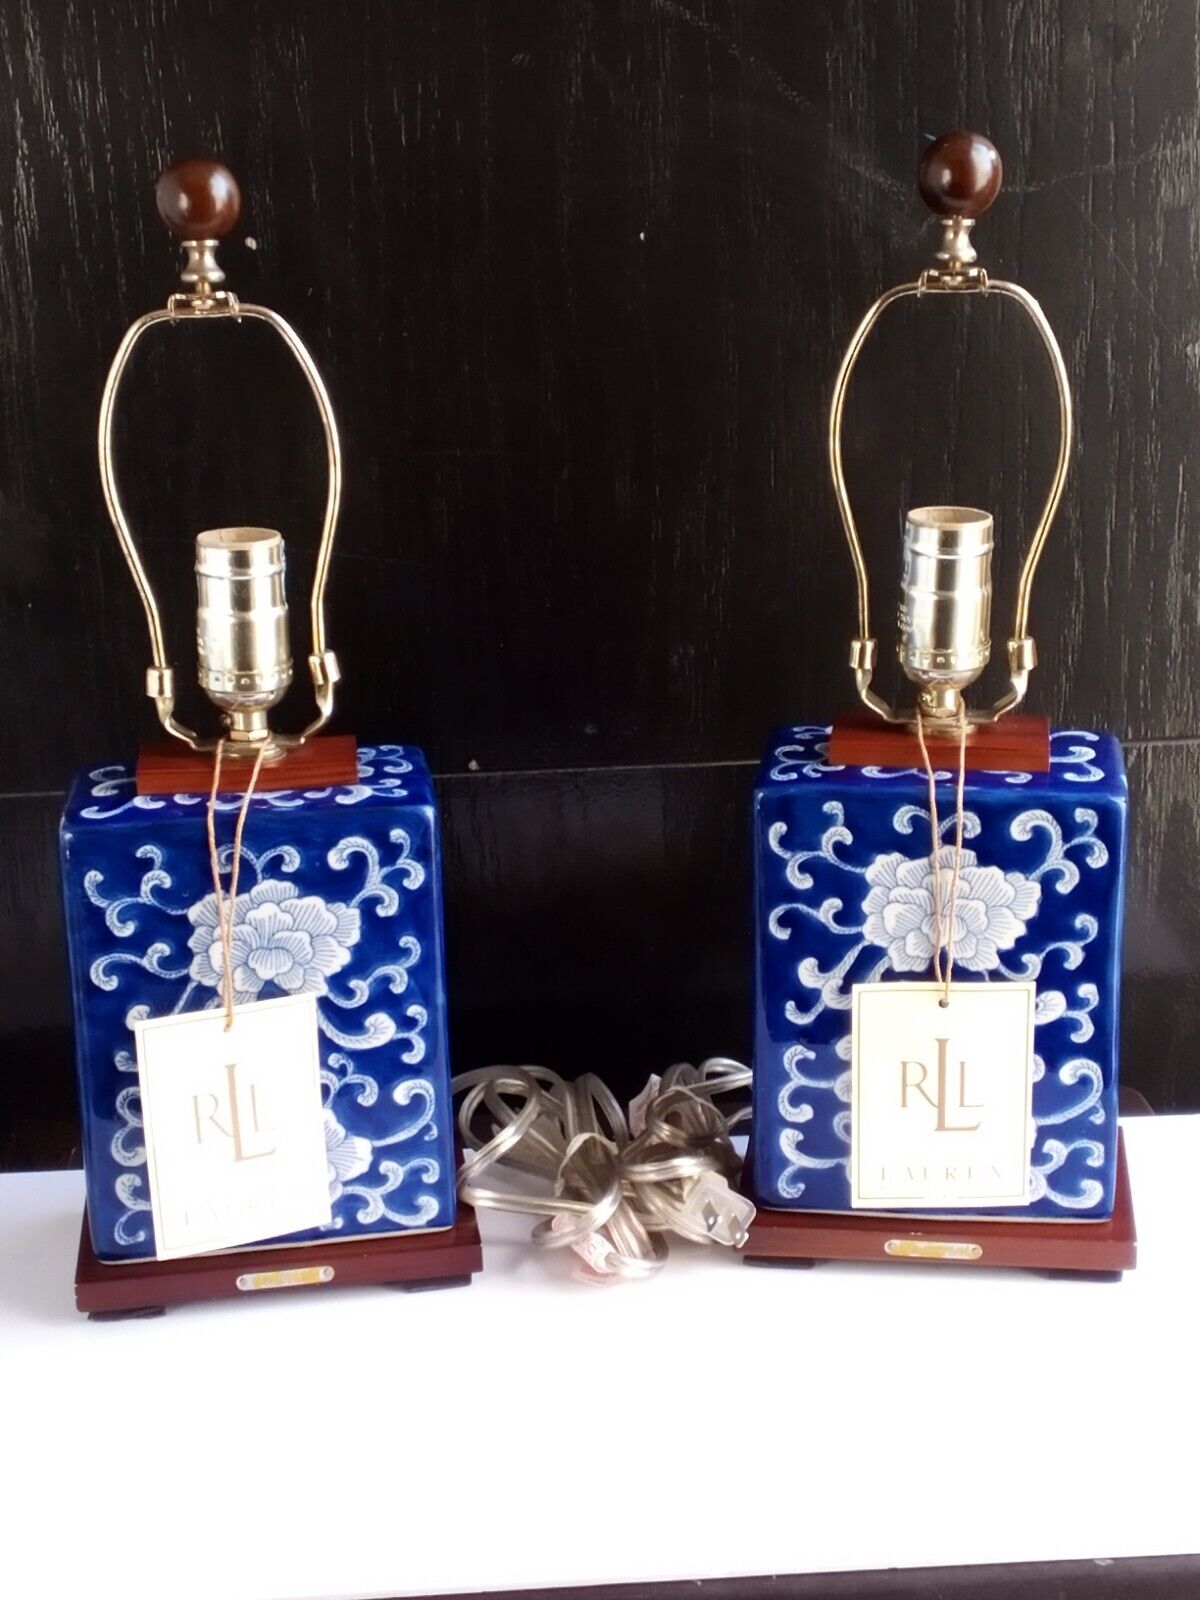 Pair of Ralph Lauren Ceramic Table Lamps, Blue & White Chinese Floral, NO SHADES